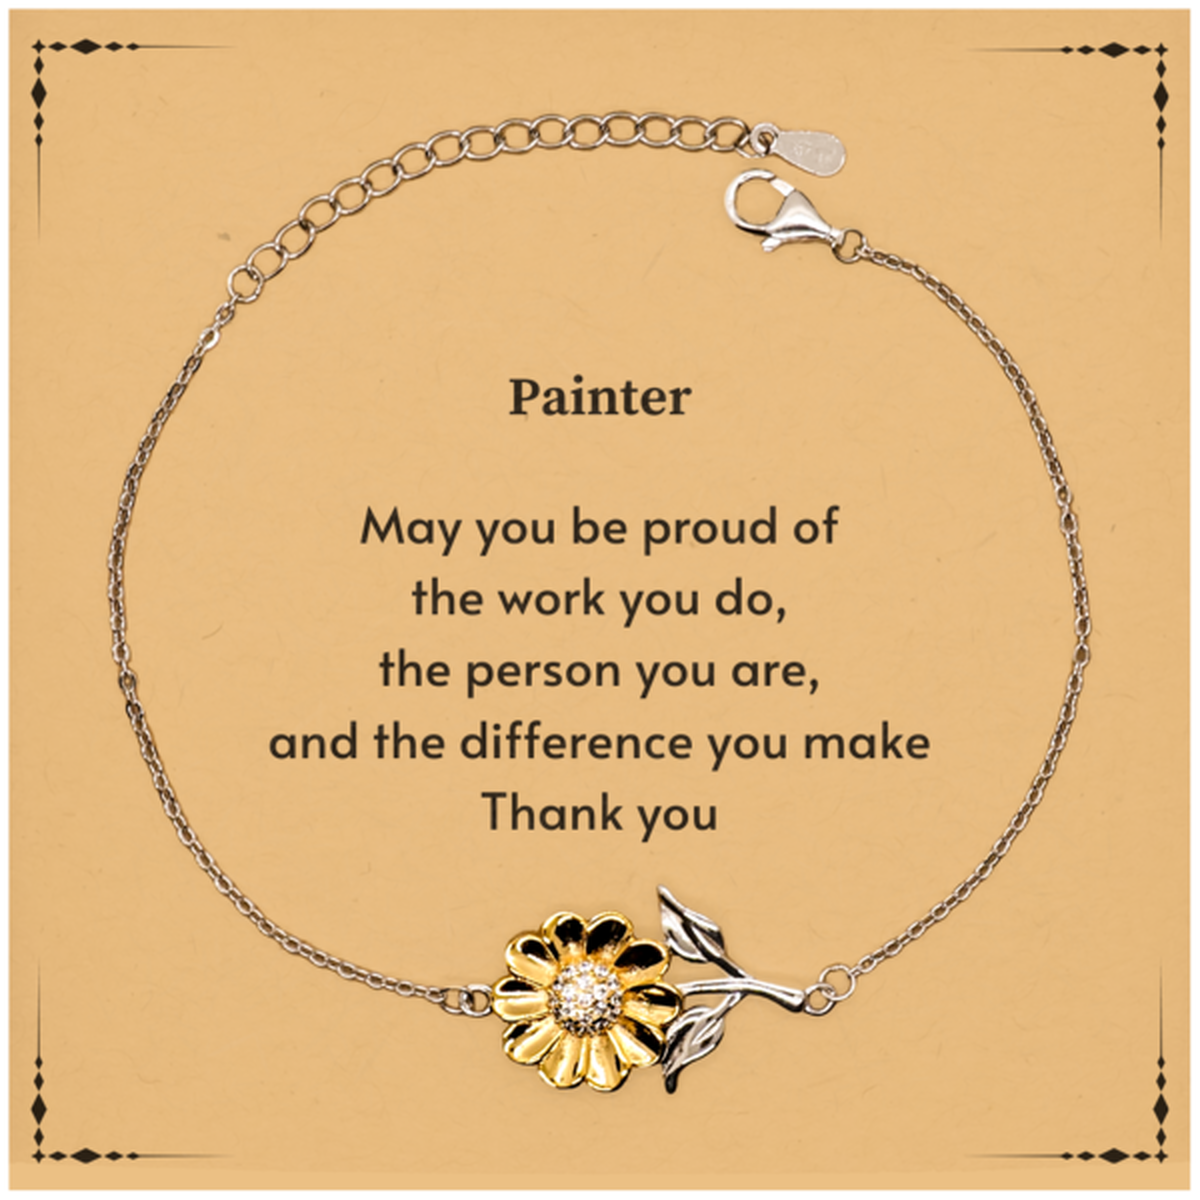 Heartwarming Sunflower Bracelet Retirement Coworkers Gifts for Painter, Painter May You be proud of the work you do, the person you are Gifts for Boss Men Women Friends